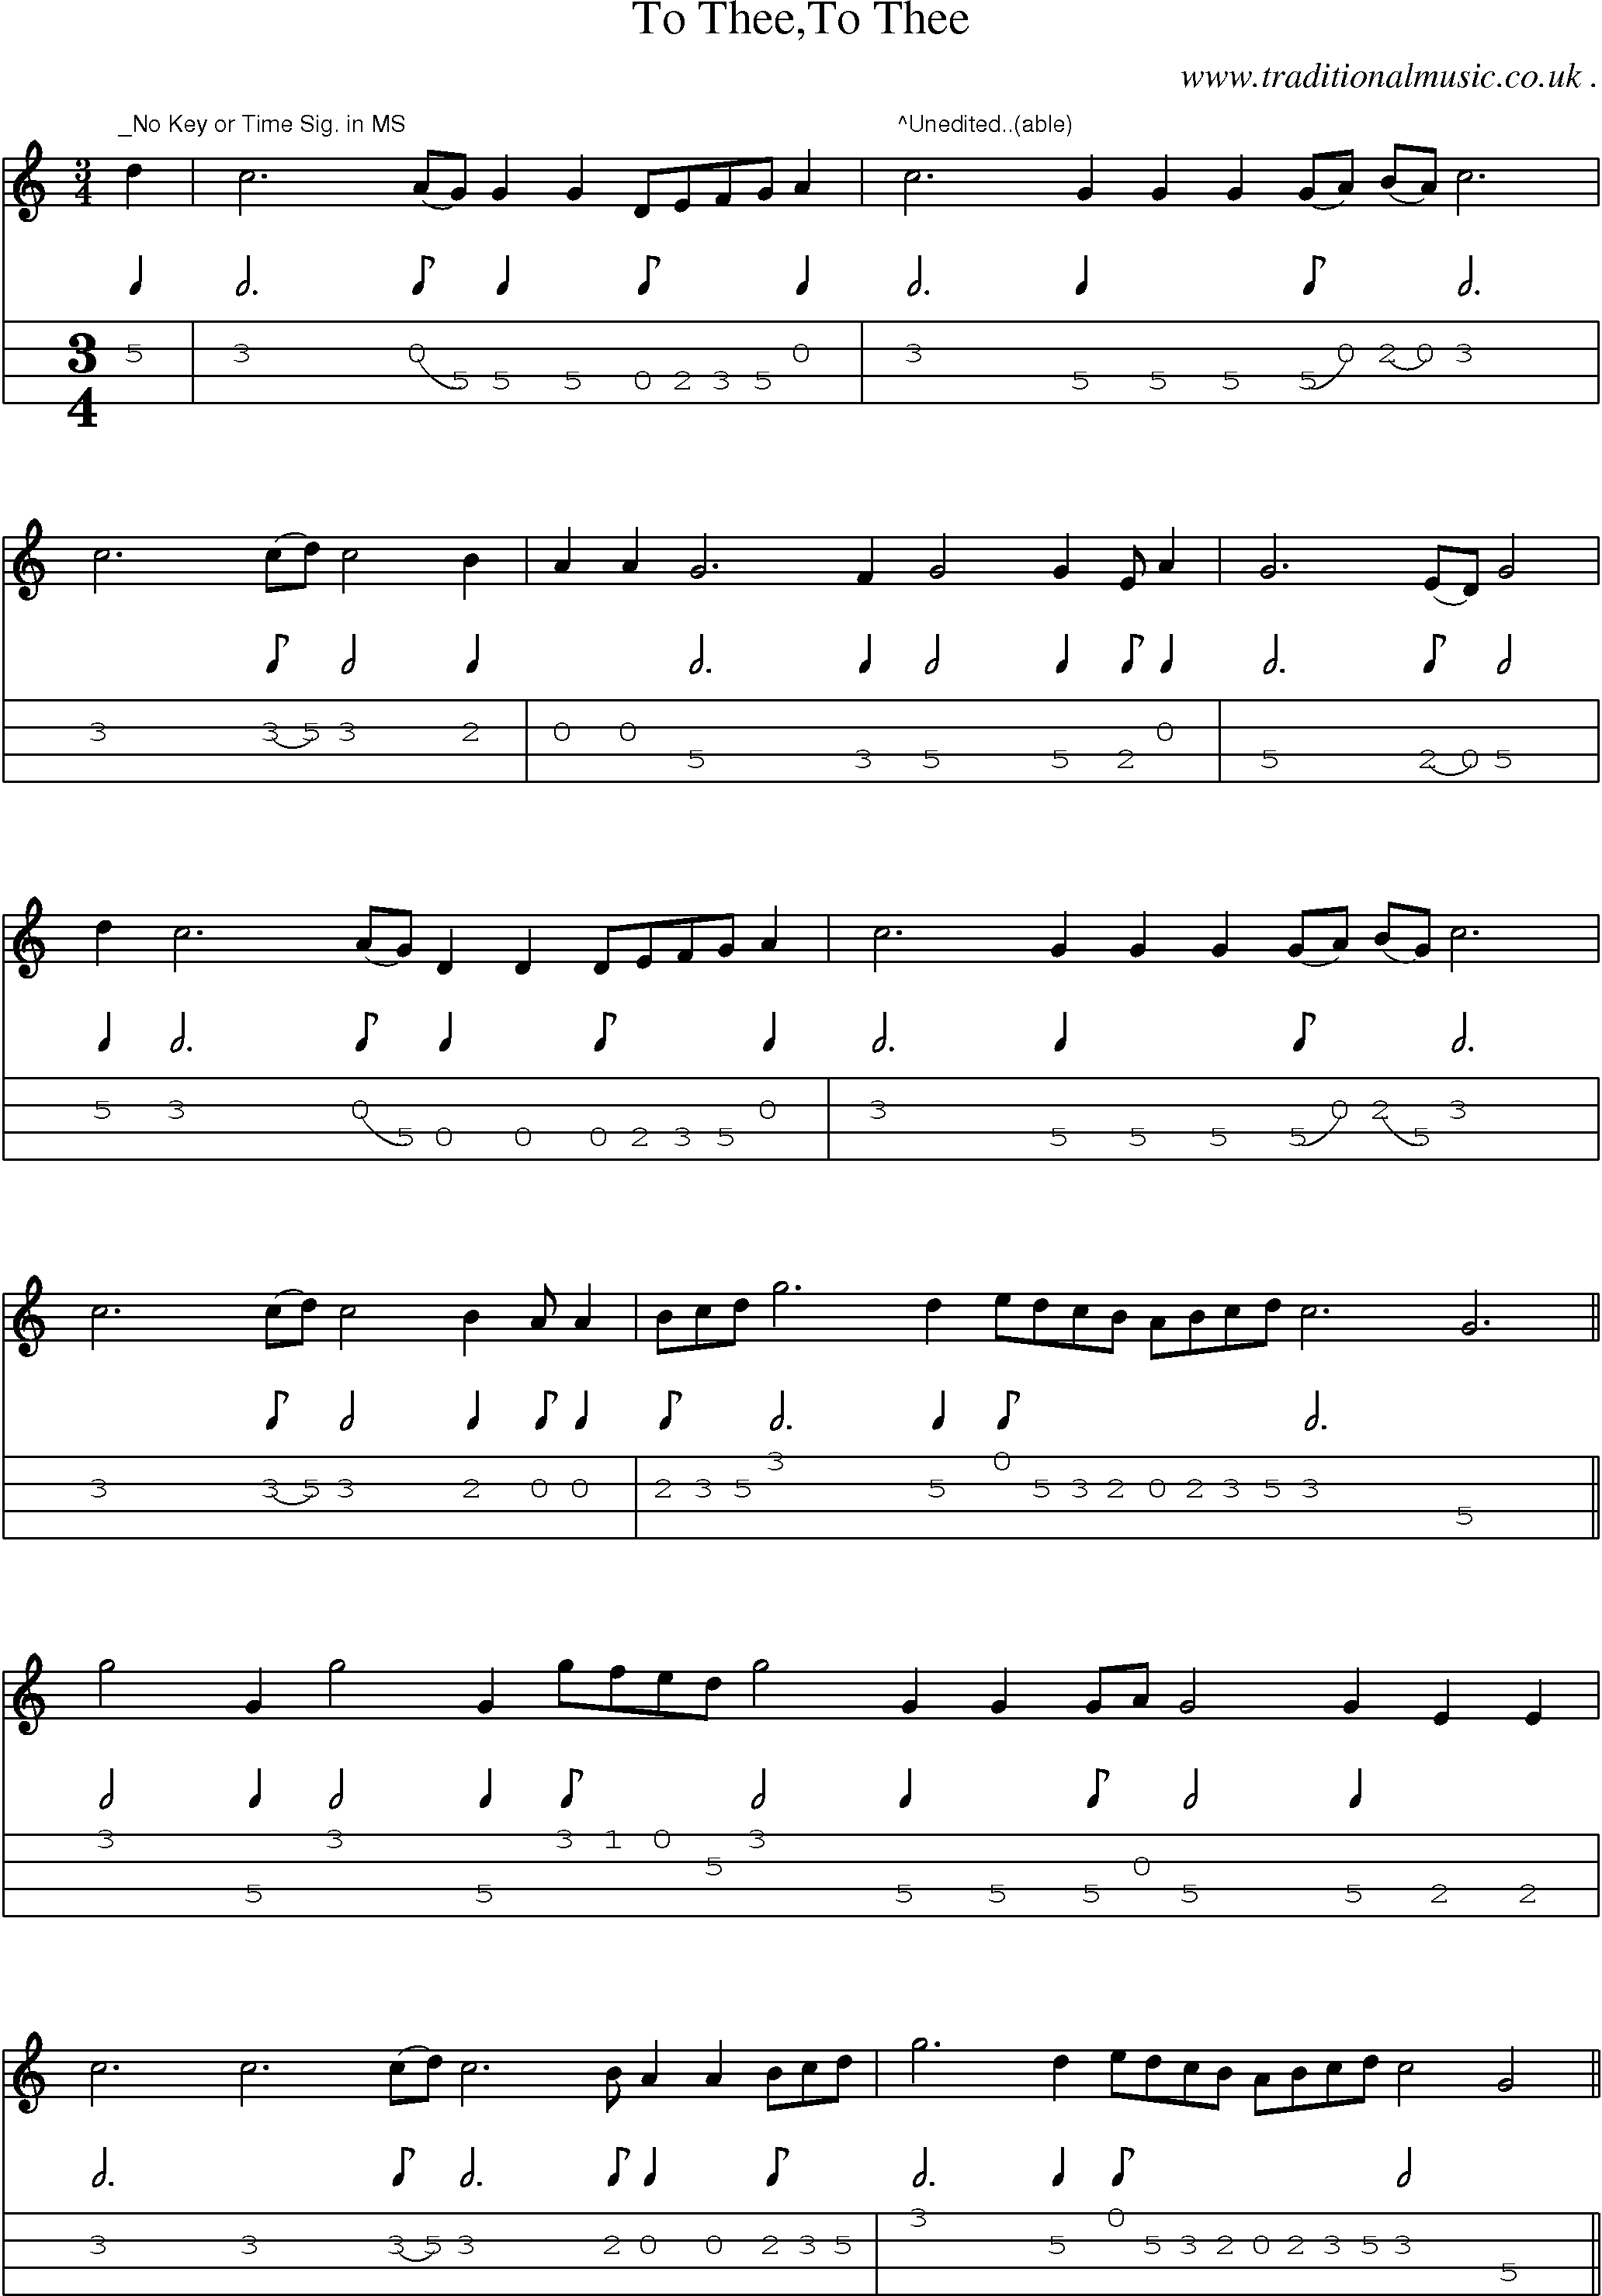 Sheet-Music and Mandolin Tabs for To Theeto Thee